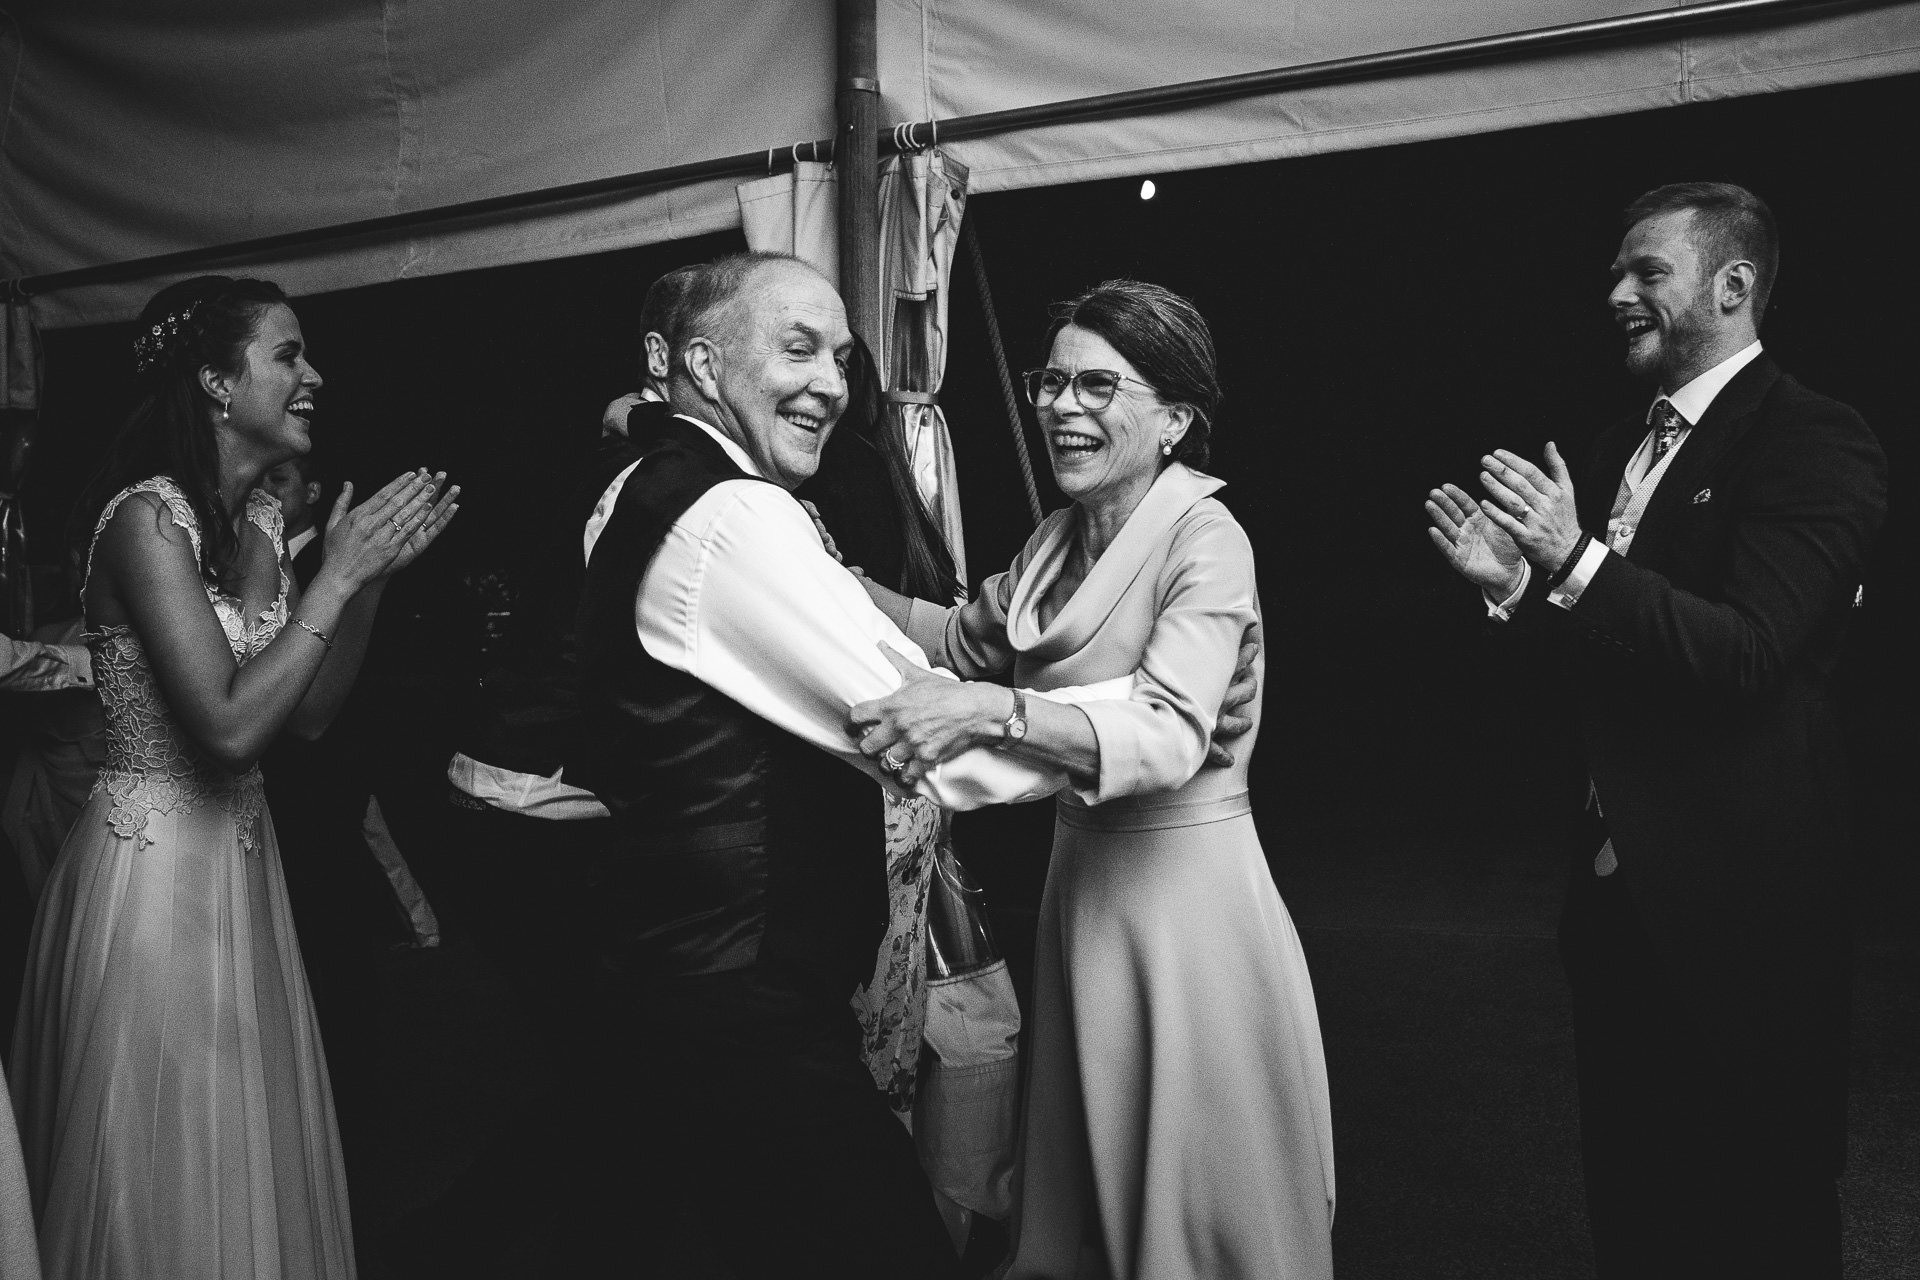 Wedding guests laughing and dancing